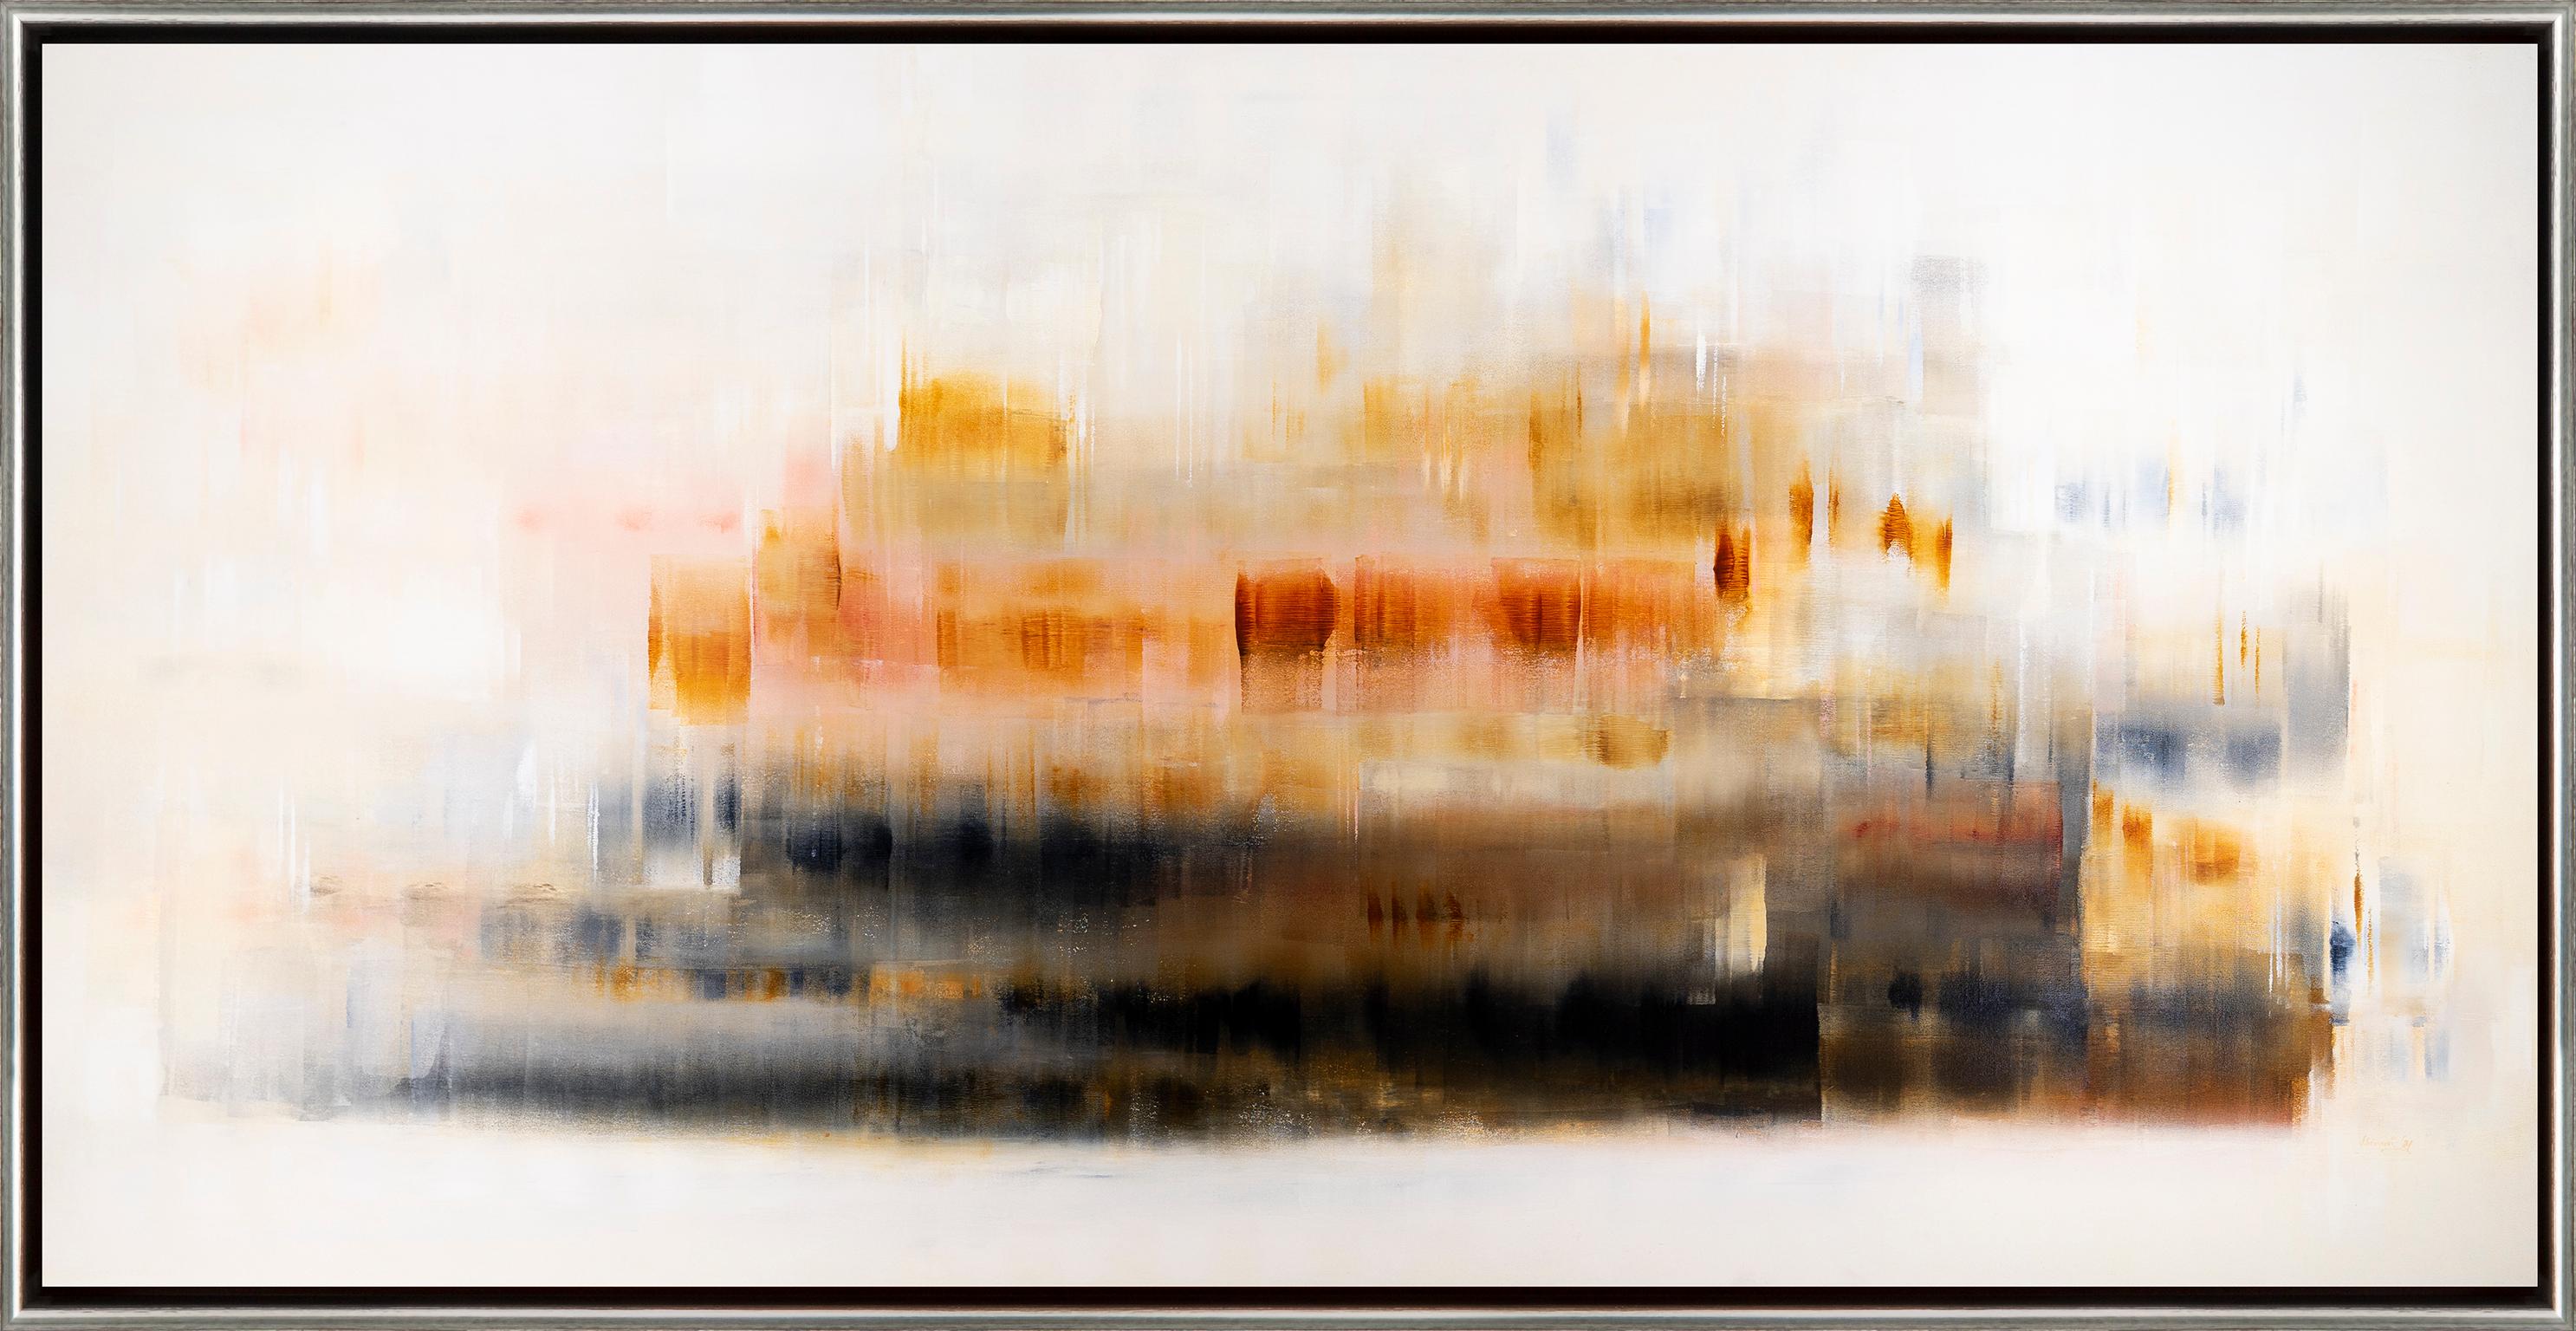 Shivani Dugar Abstract Painting - "Spring Winds" Large Horizontal Abstract Oil on Canvas Framed Painting